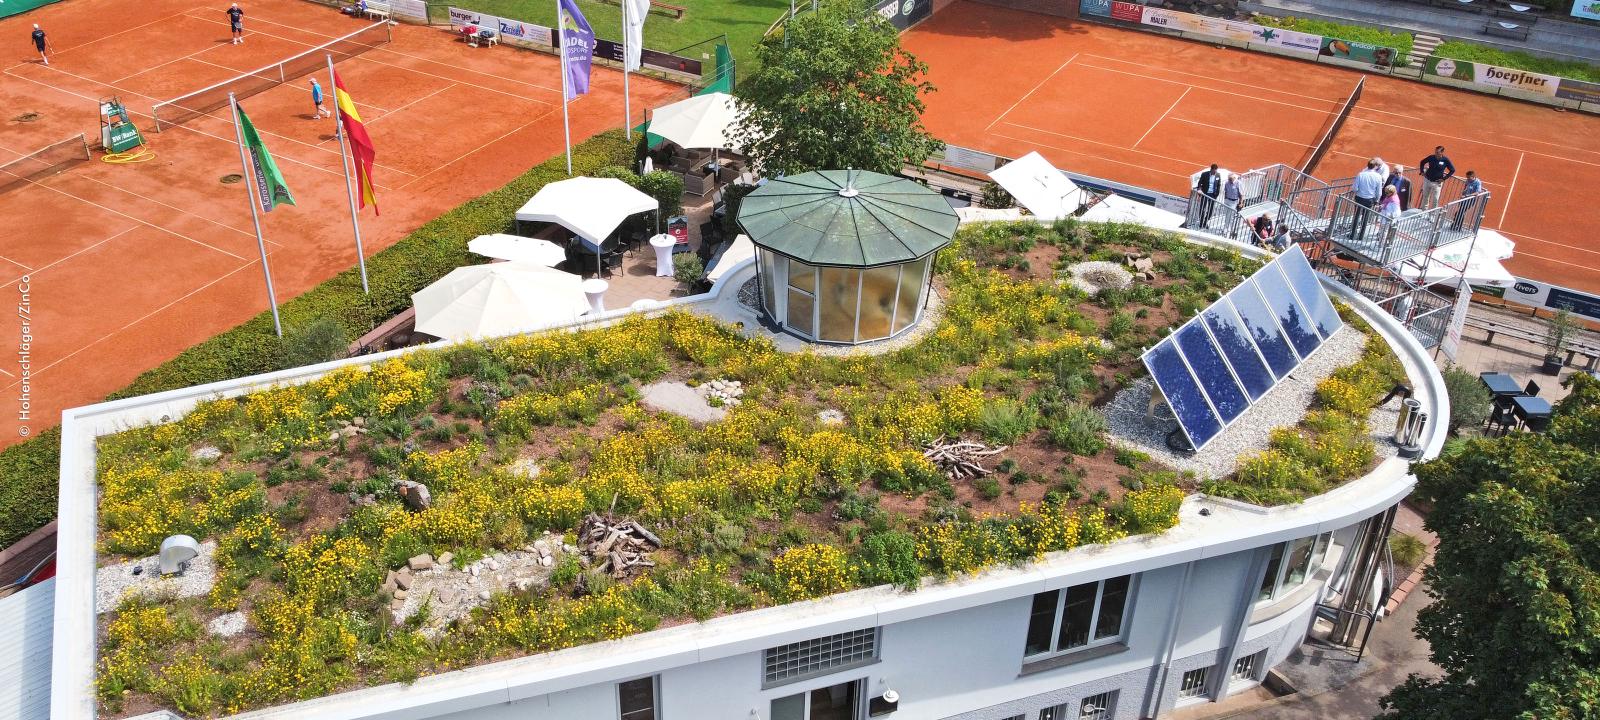 Tennis court with a green roof